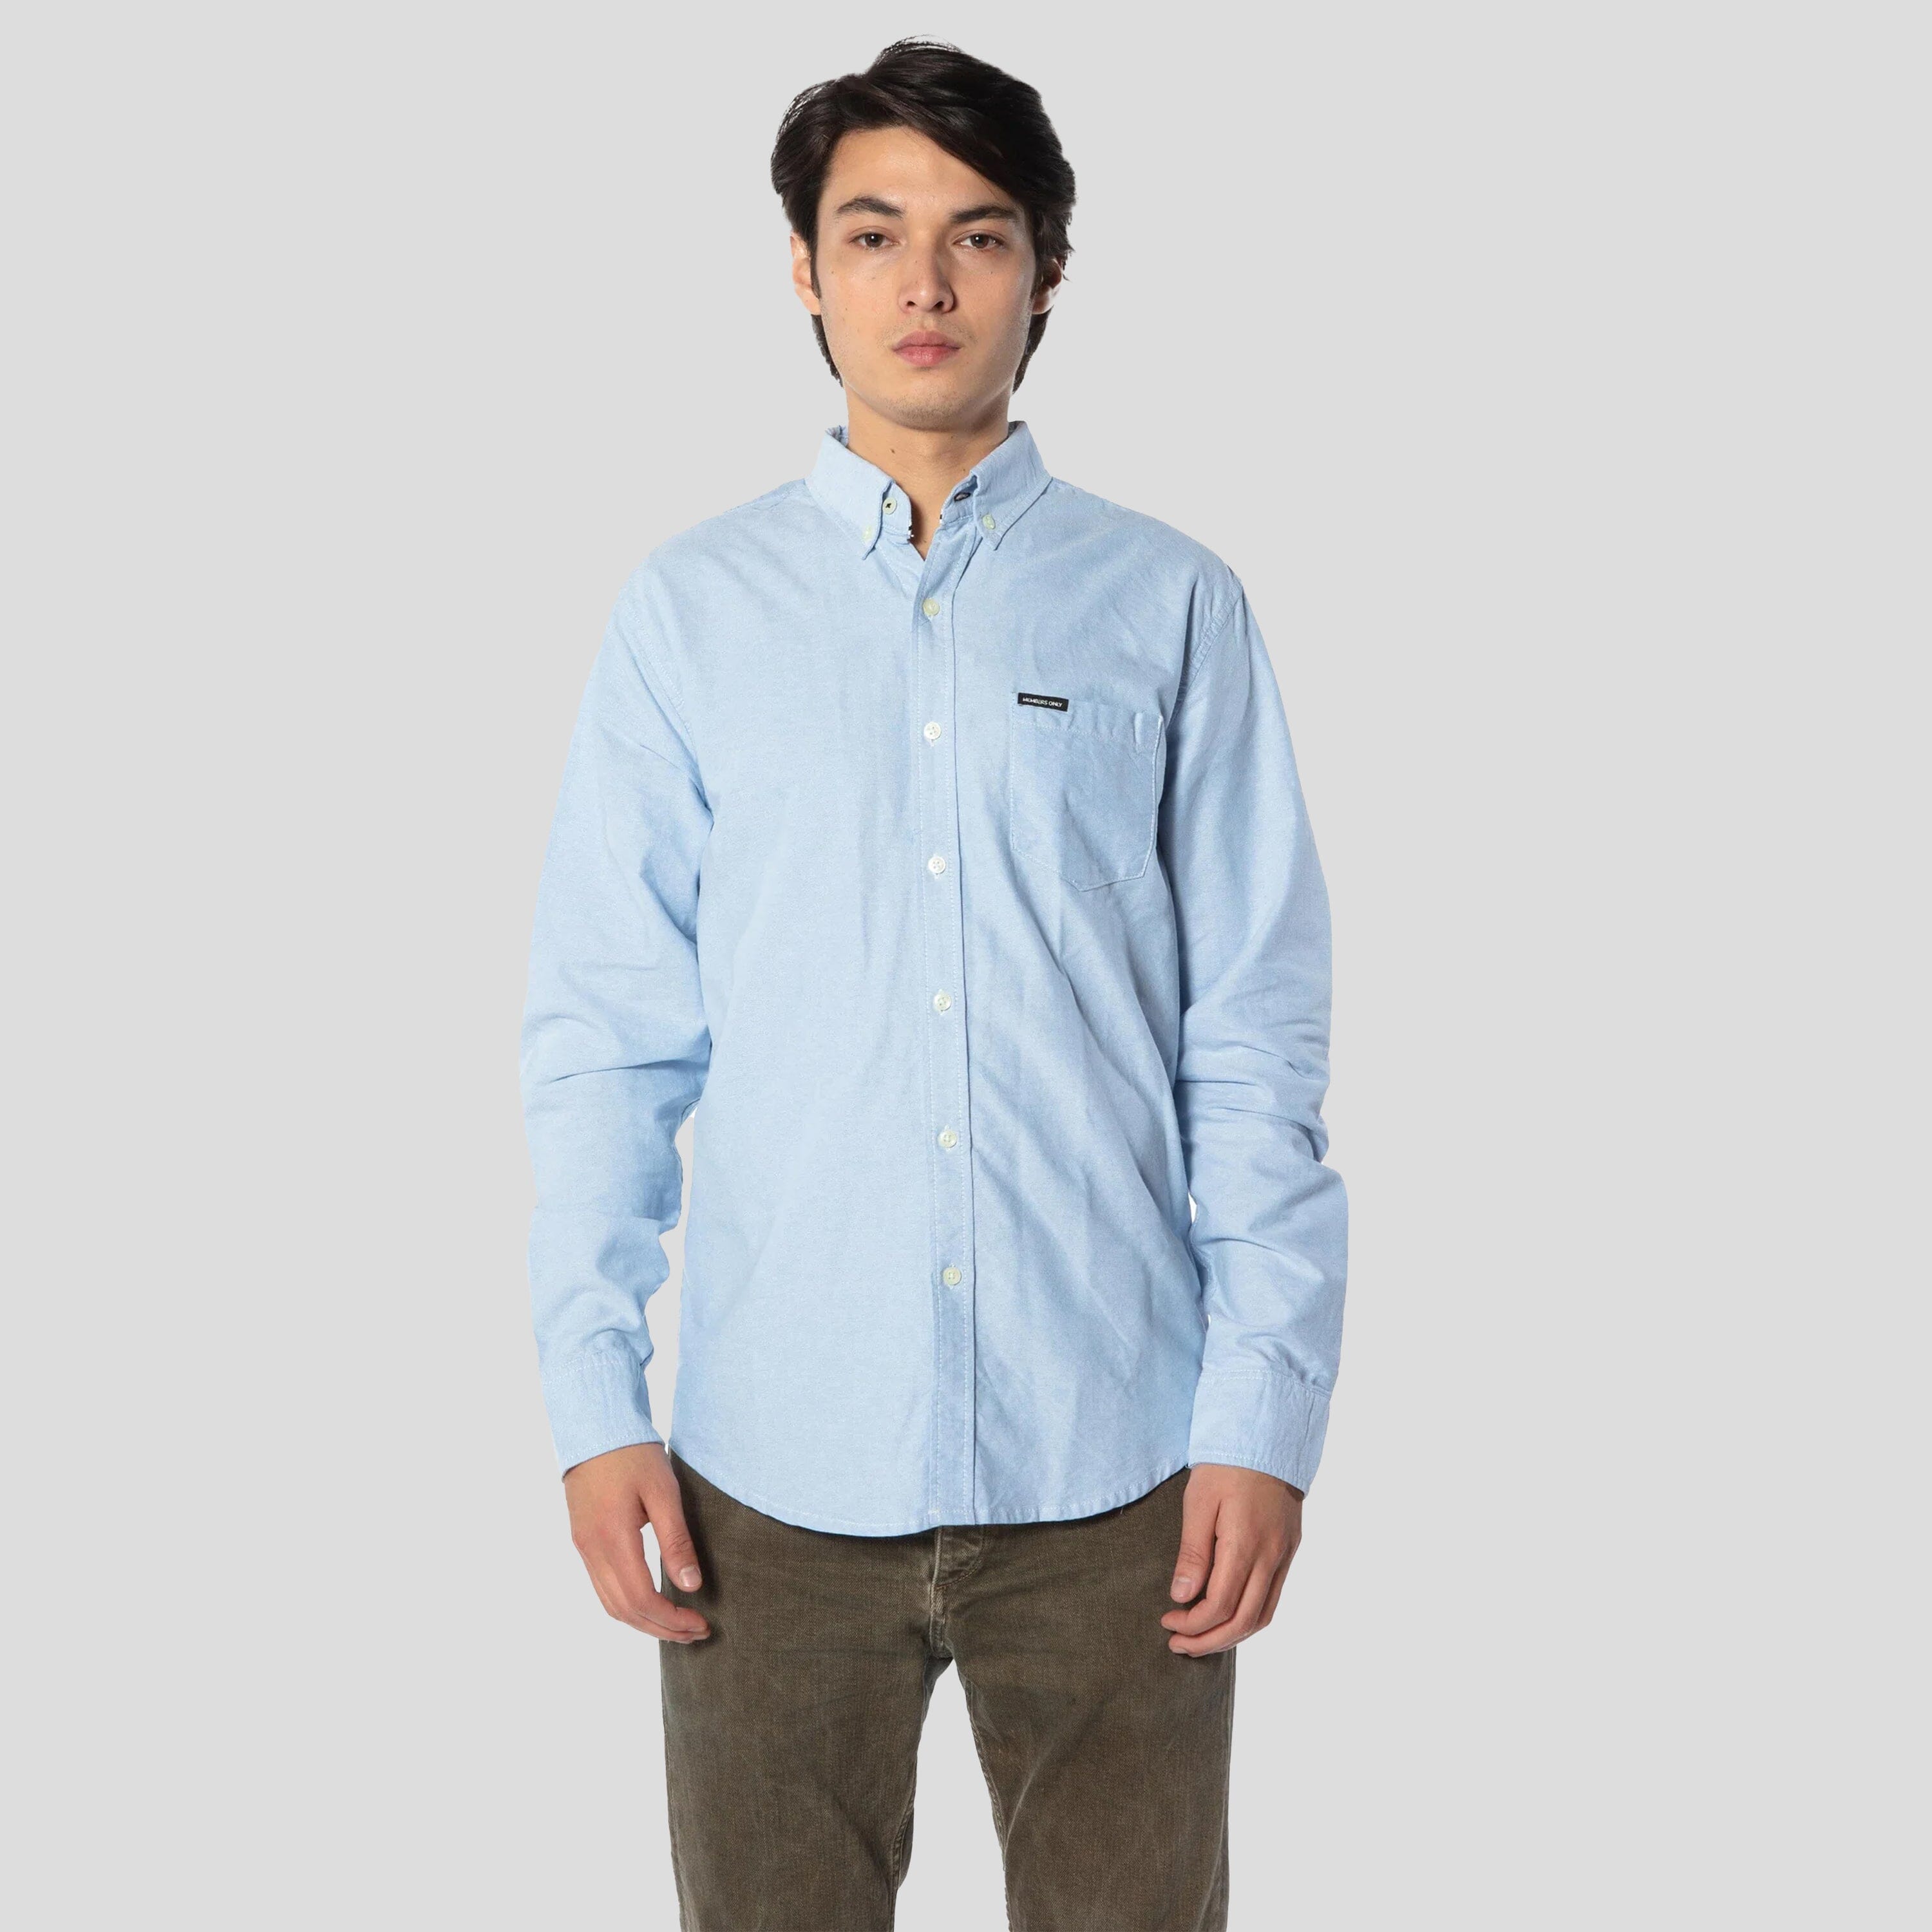 Men's Shirts | Members Only – Members Only®